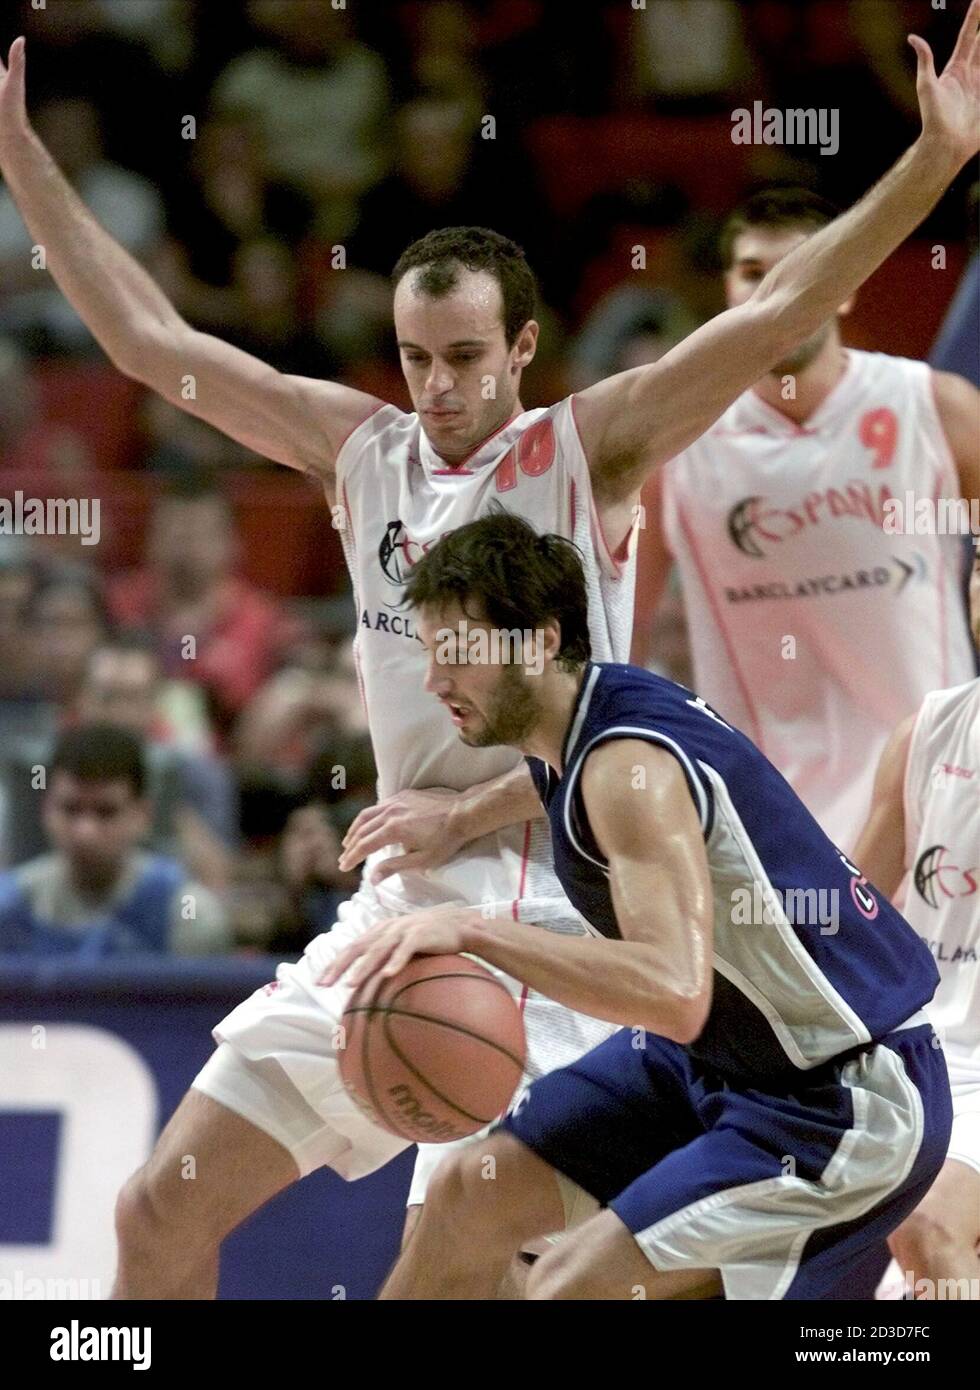 ITALIAN PLAYER GIANLUCA BASILE DRIVES TO THE BASKET AS SPANISH PLAYER  CARLOS JIMENES DEFENDS DURING THEIR SEMI FINAL MATCH AT THE EUROPEAN  BASKETBALL CHAMPIONSHIPS IN STOCKHOLM Stock Photo - Alamy